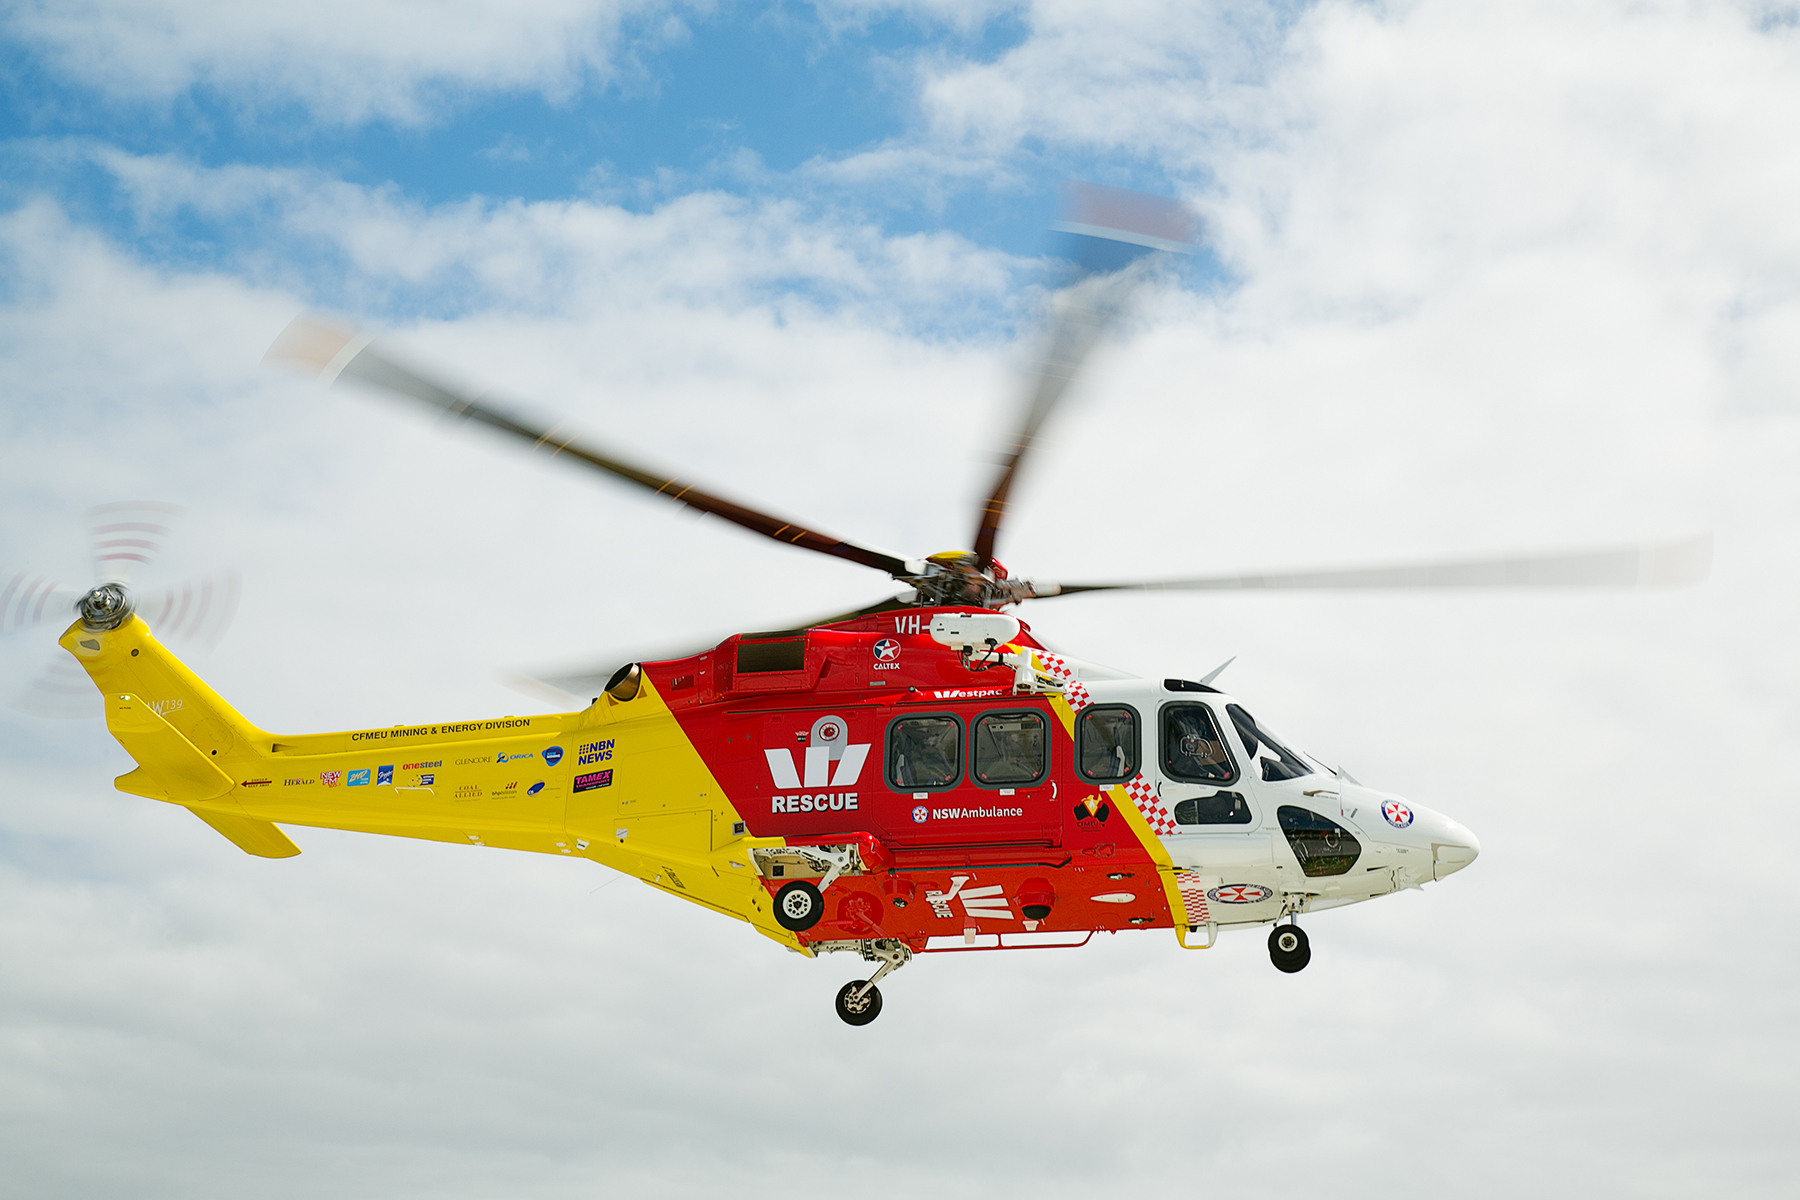 Rescue helicopter called to Wee Waa truck rollover